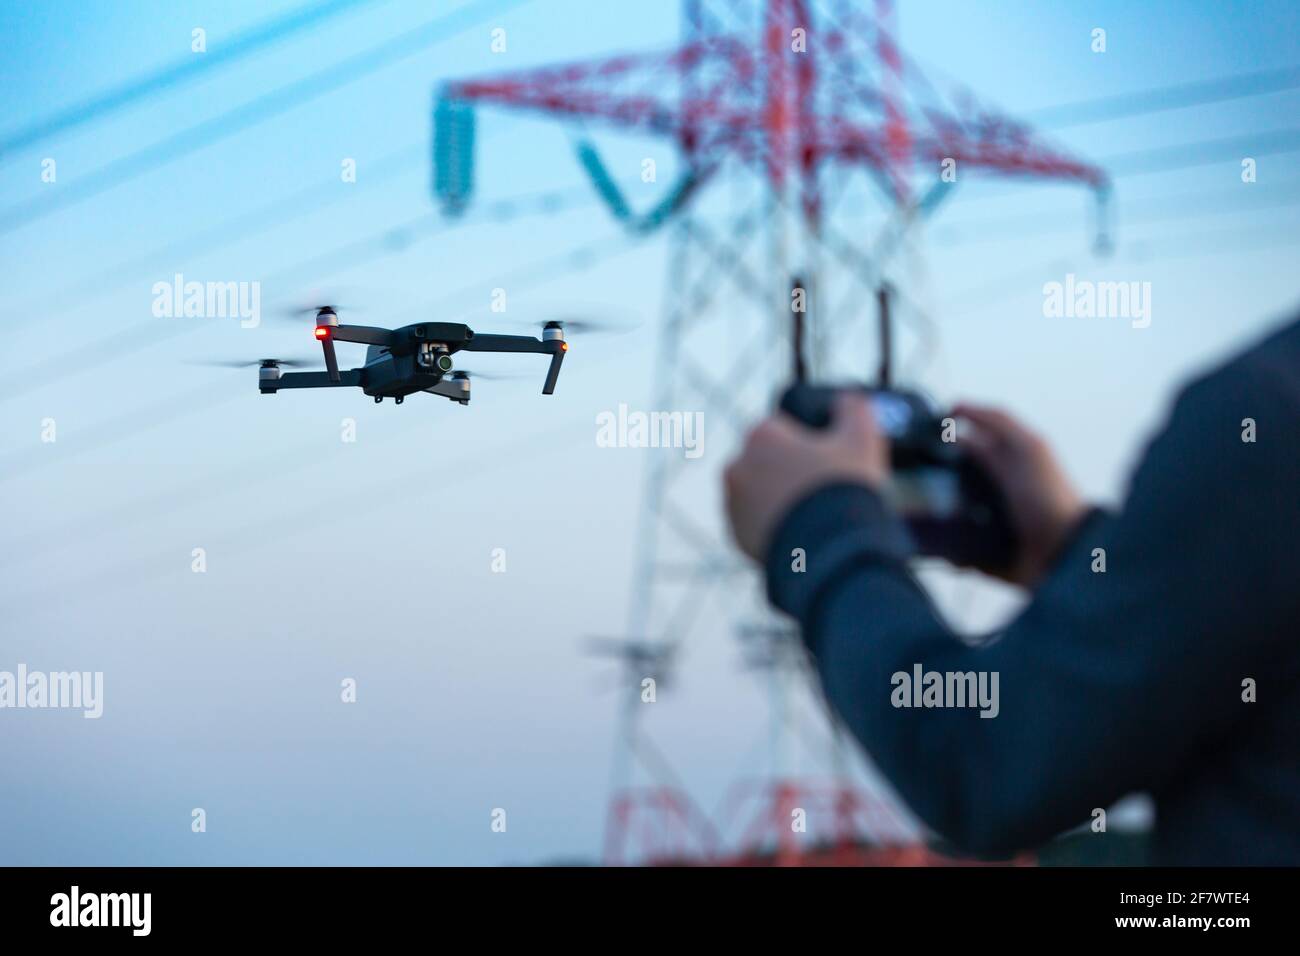 Pilot flying a drone collecting the data remotely from a power tower station or for telecommunication. Drone safety, power transmission tower. Stock Photo